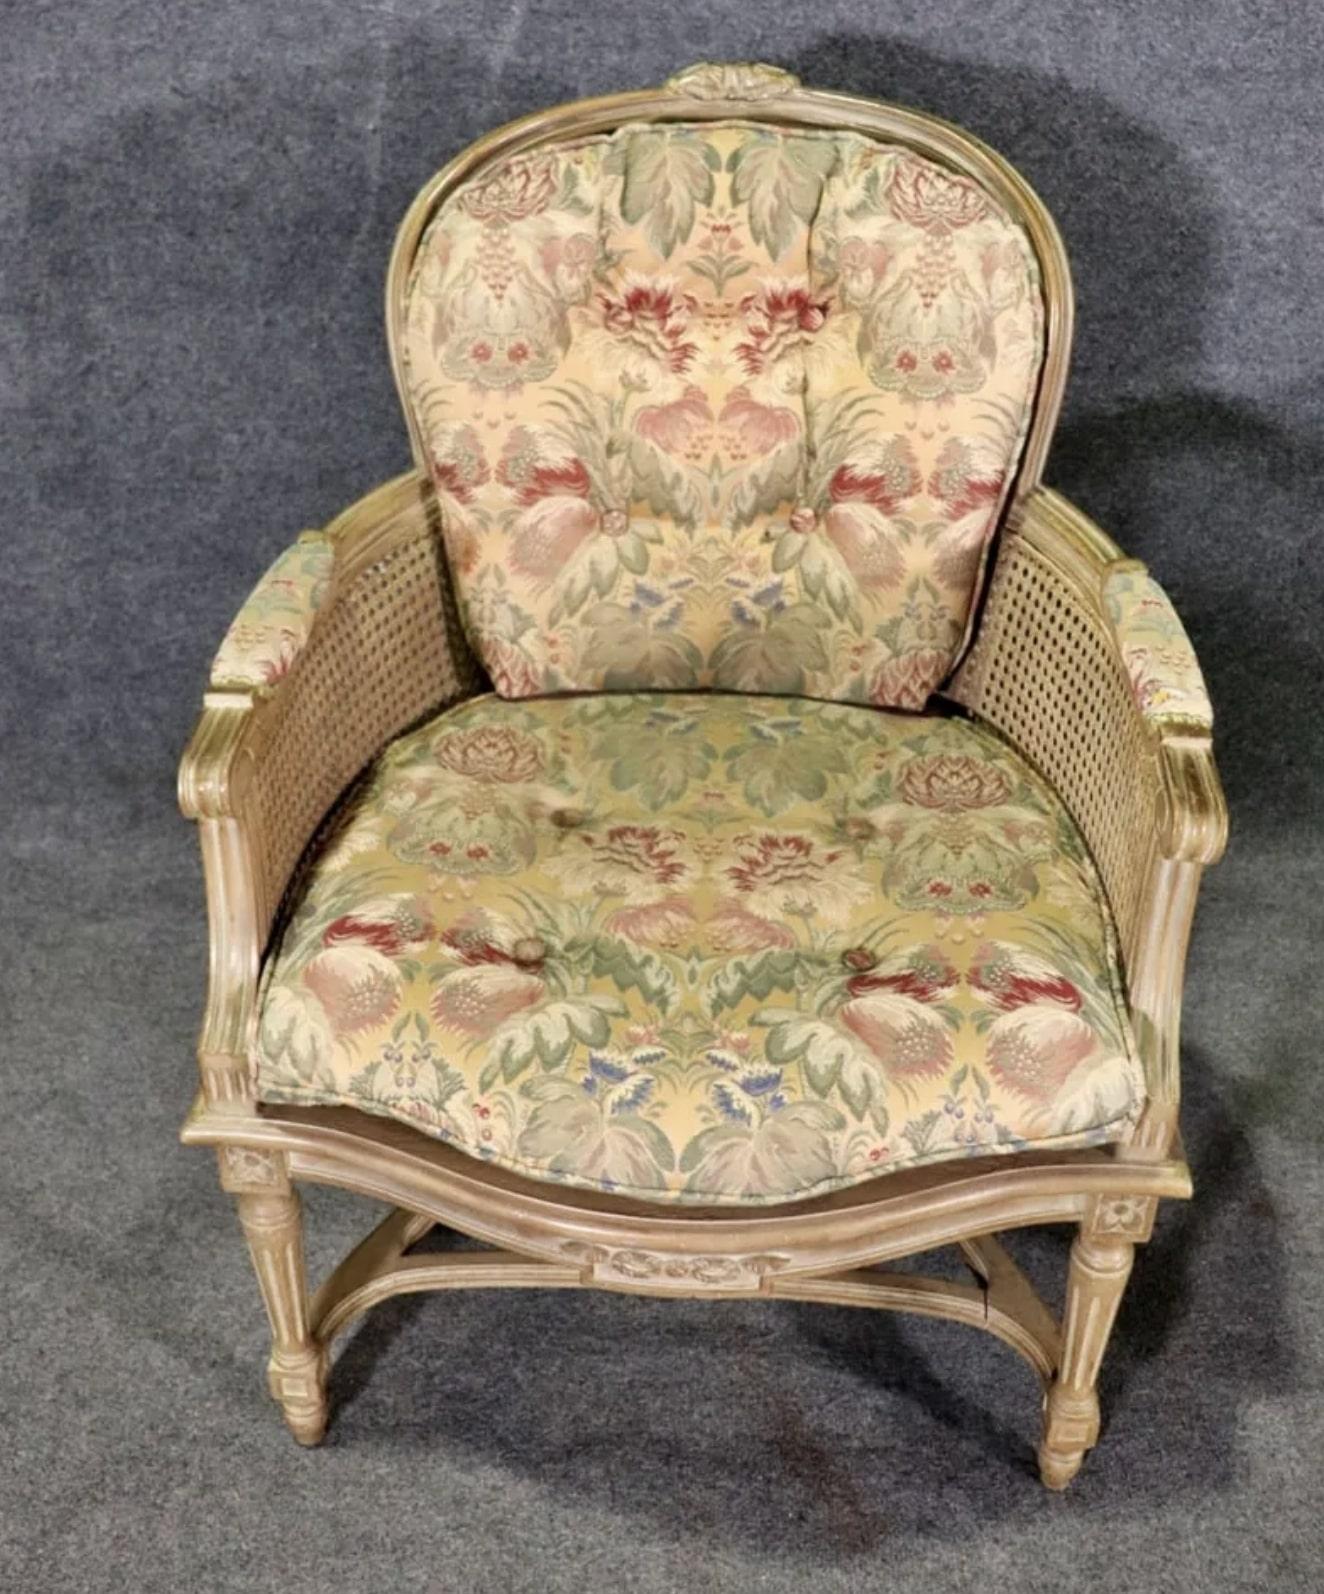 Pair of vintage armchairs with caned seats, sides, and backs. Plump cushioned seats and back pillow match the arm rests.
Please confirm location NY or NJ